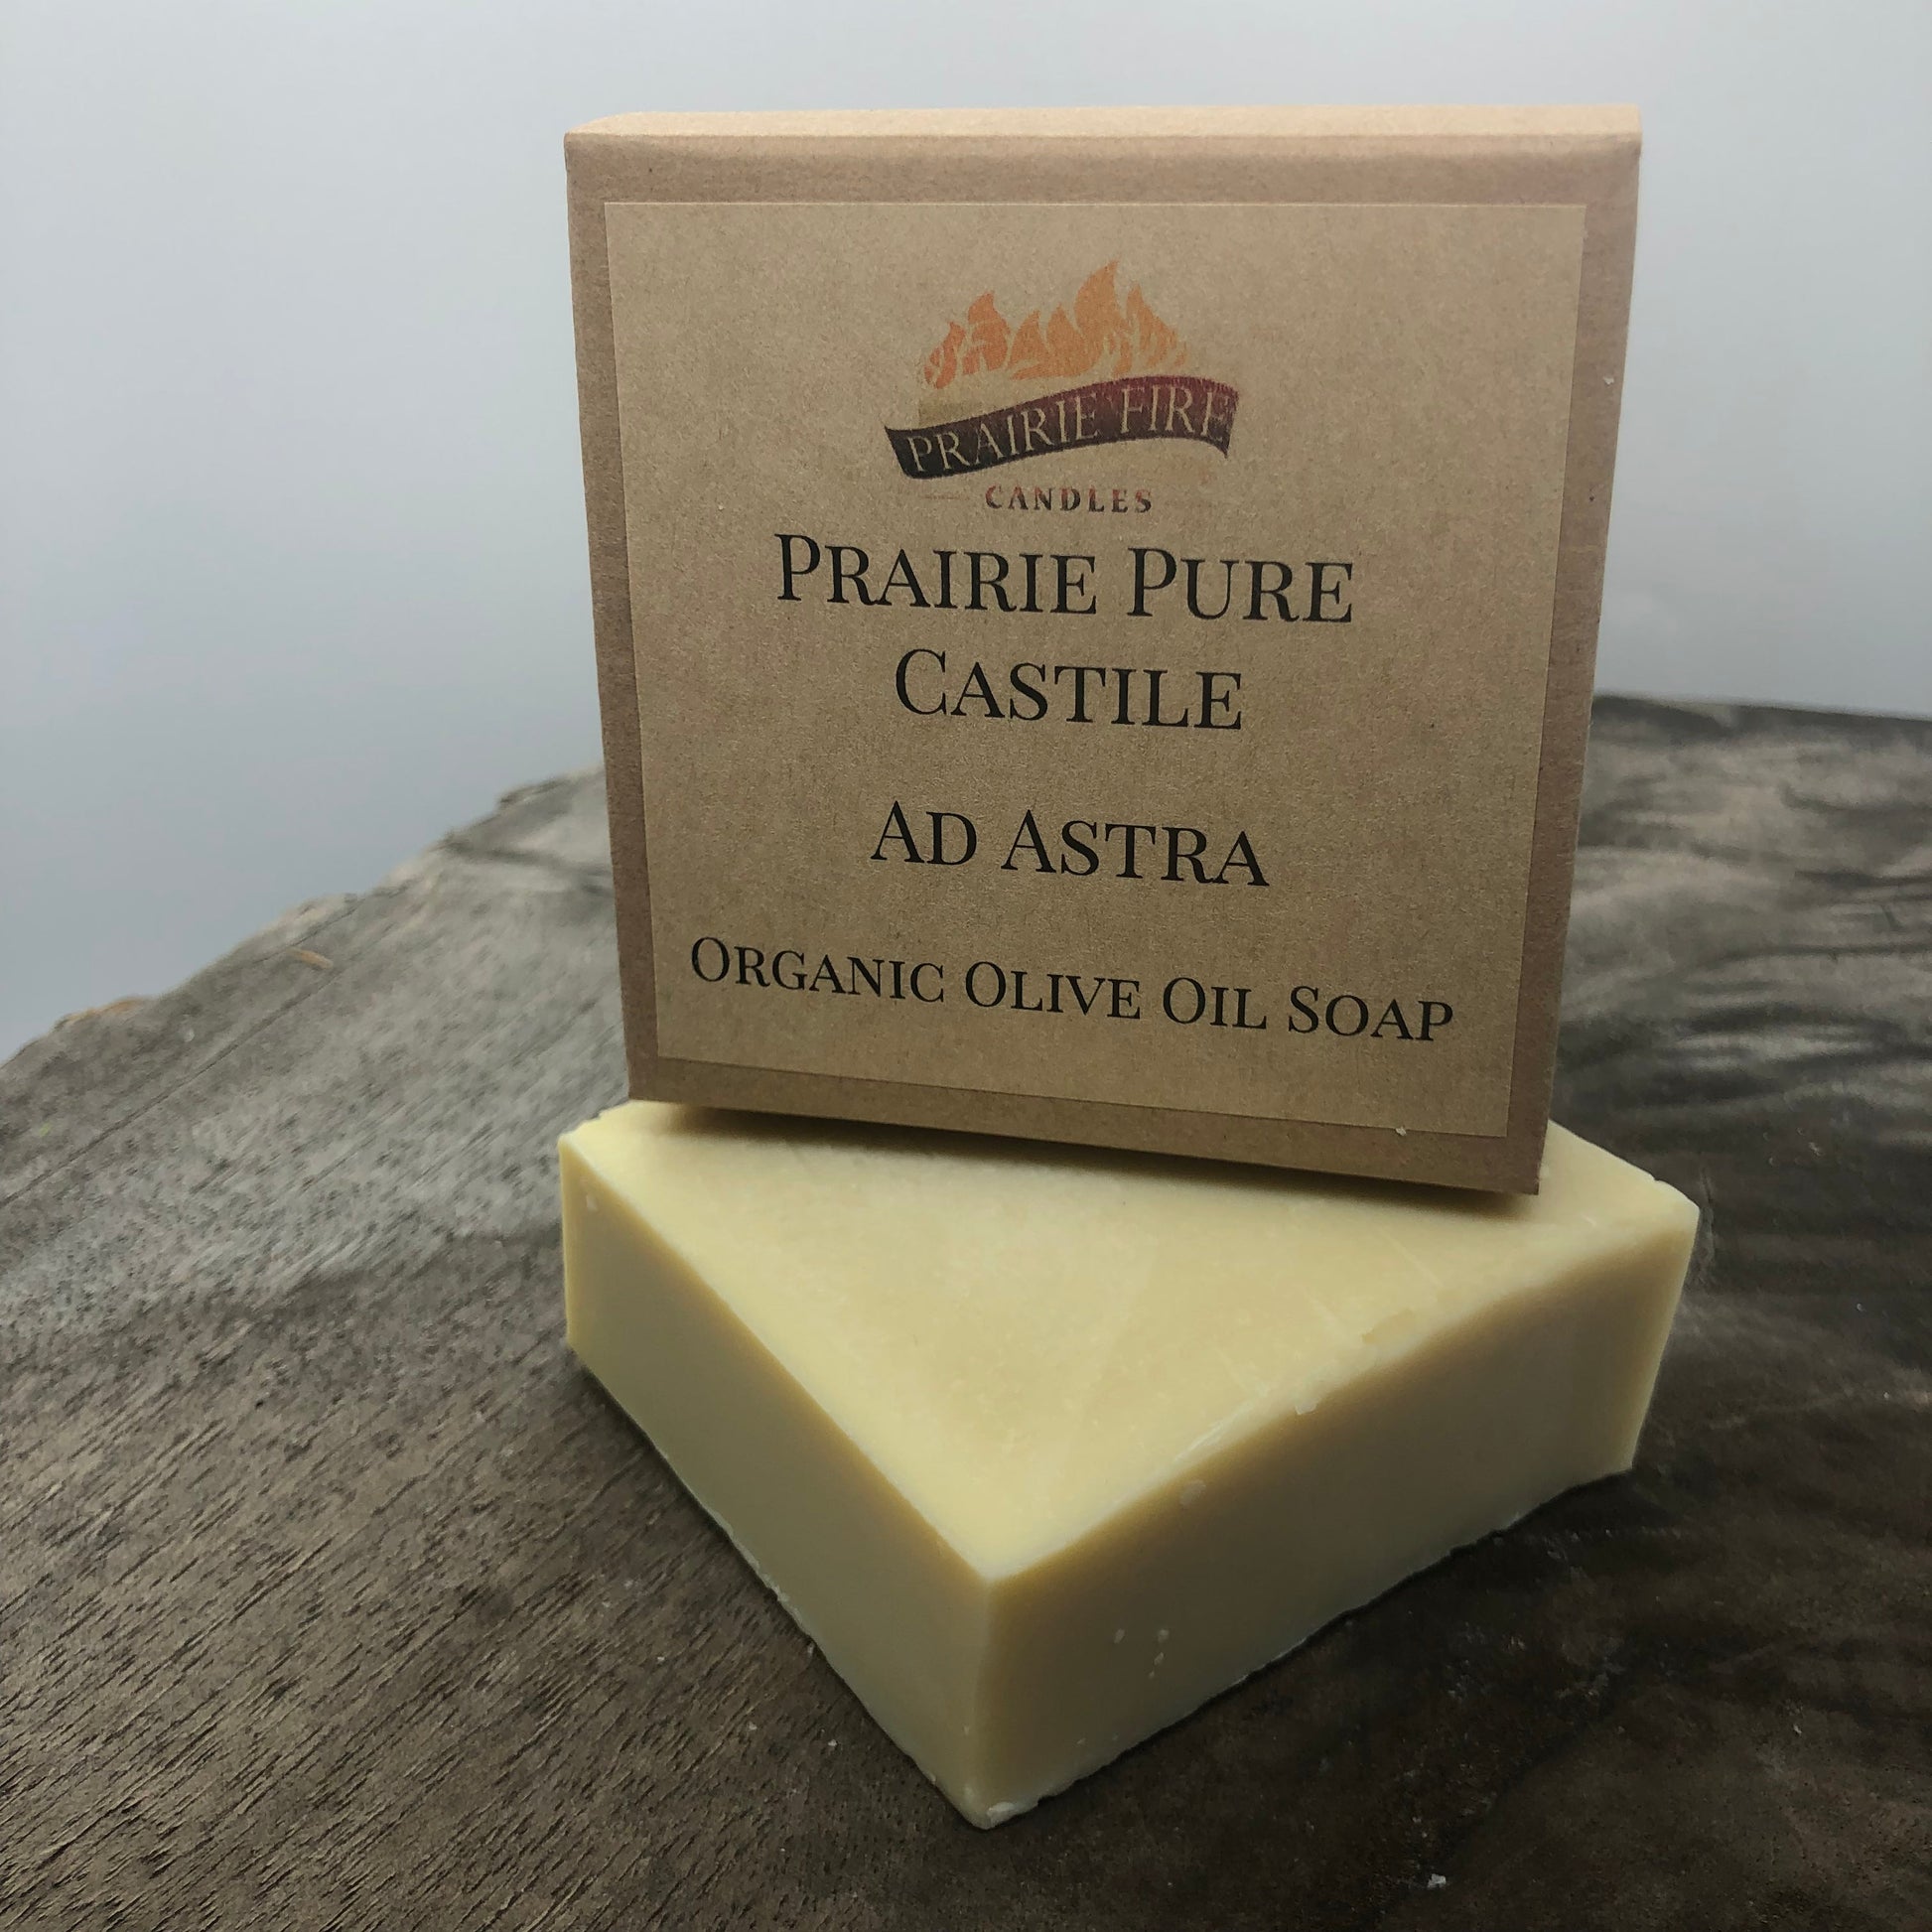 Ad Astra Real Castile Organic Olive Oil Soap for Sensitive Skin - Dye Free - 100% Certified Organic Extra Virgin Olive Oil-2